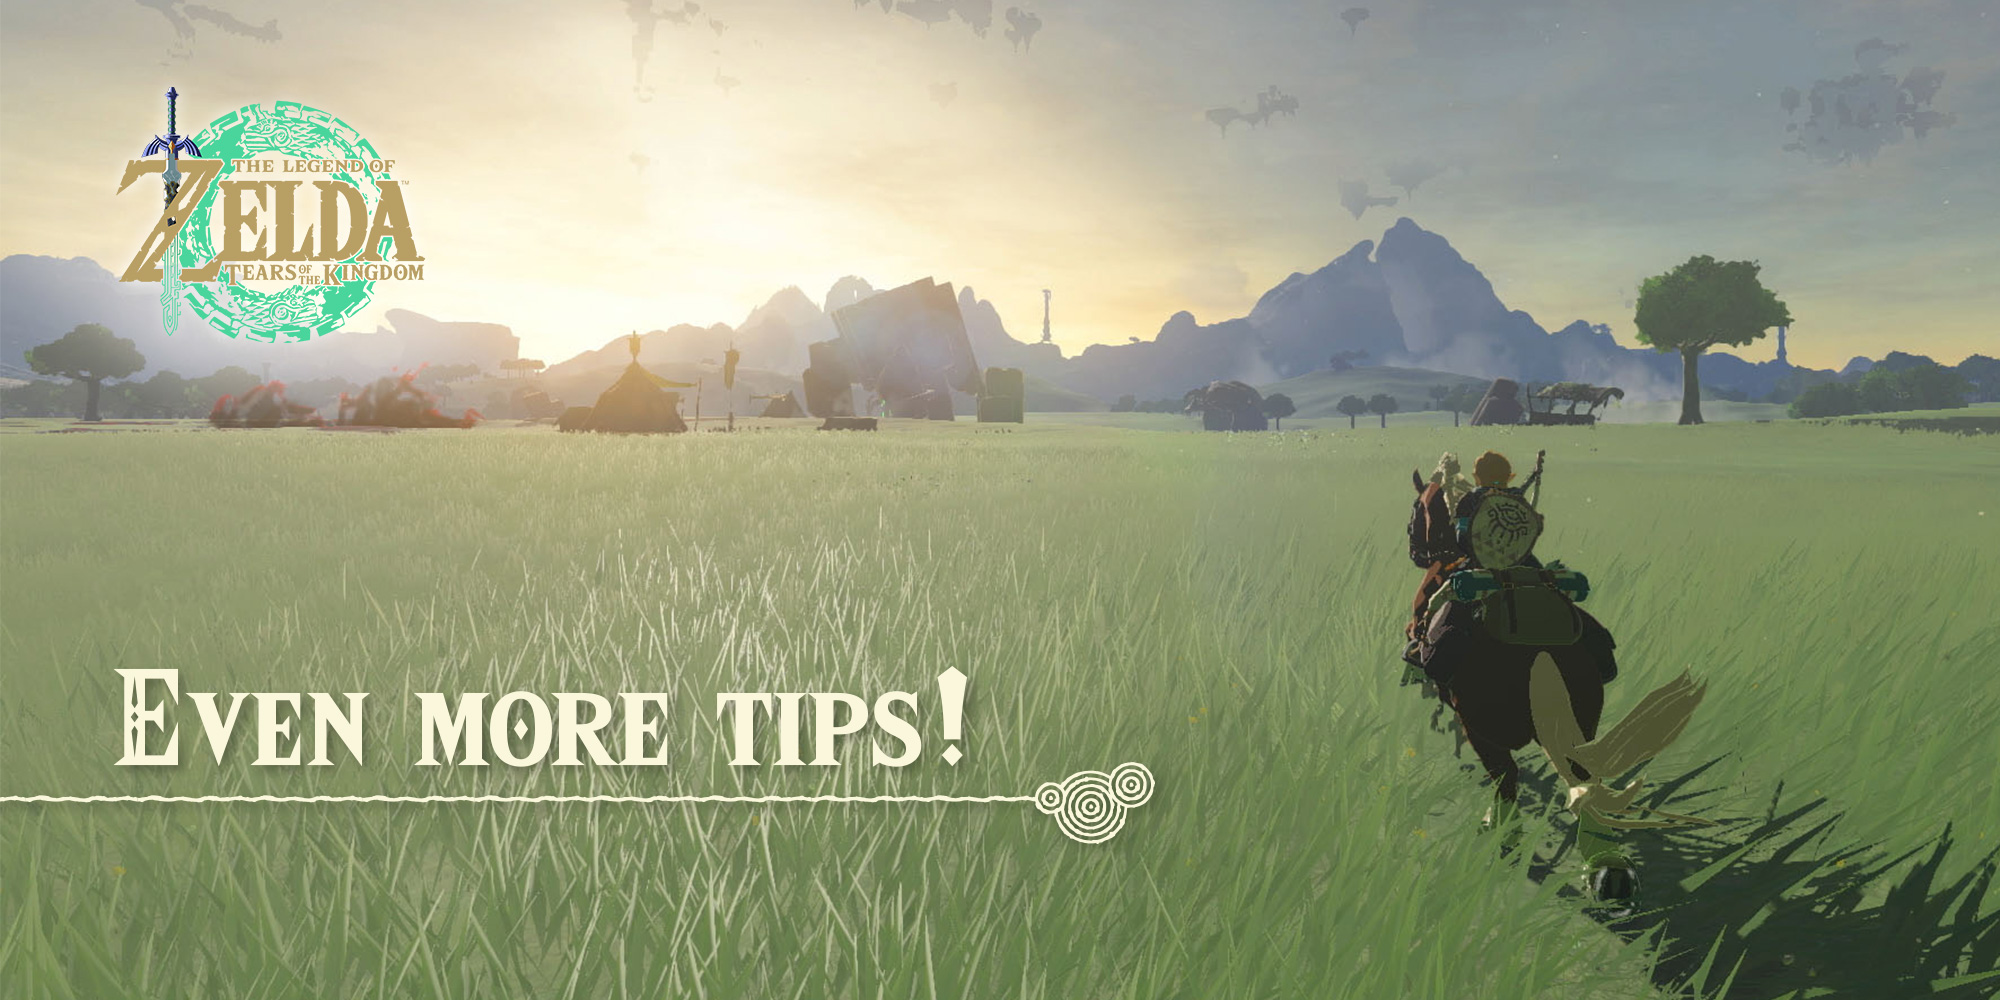 Breath of the Wild tips and tricks - Side quests, page 3 - Zelda's Palace